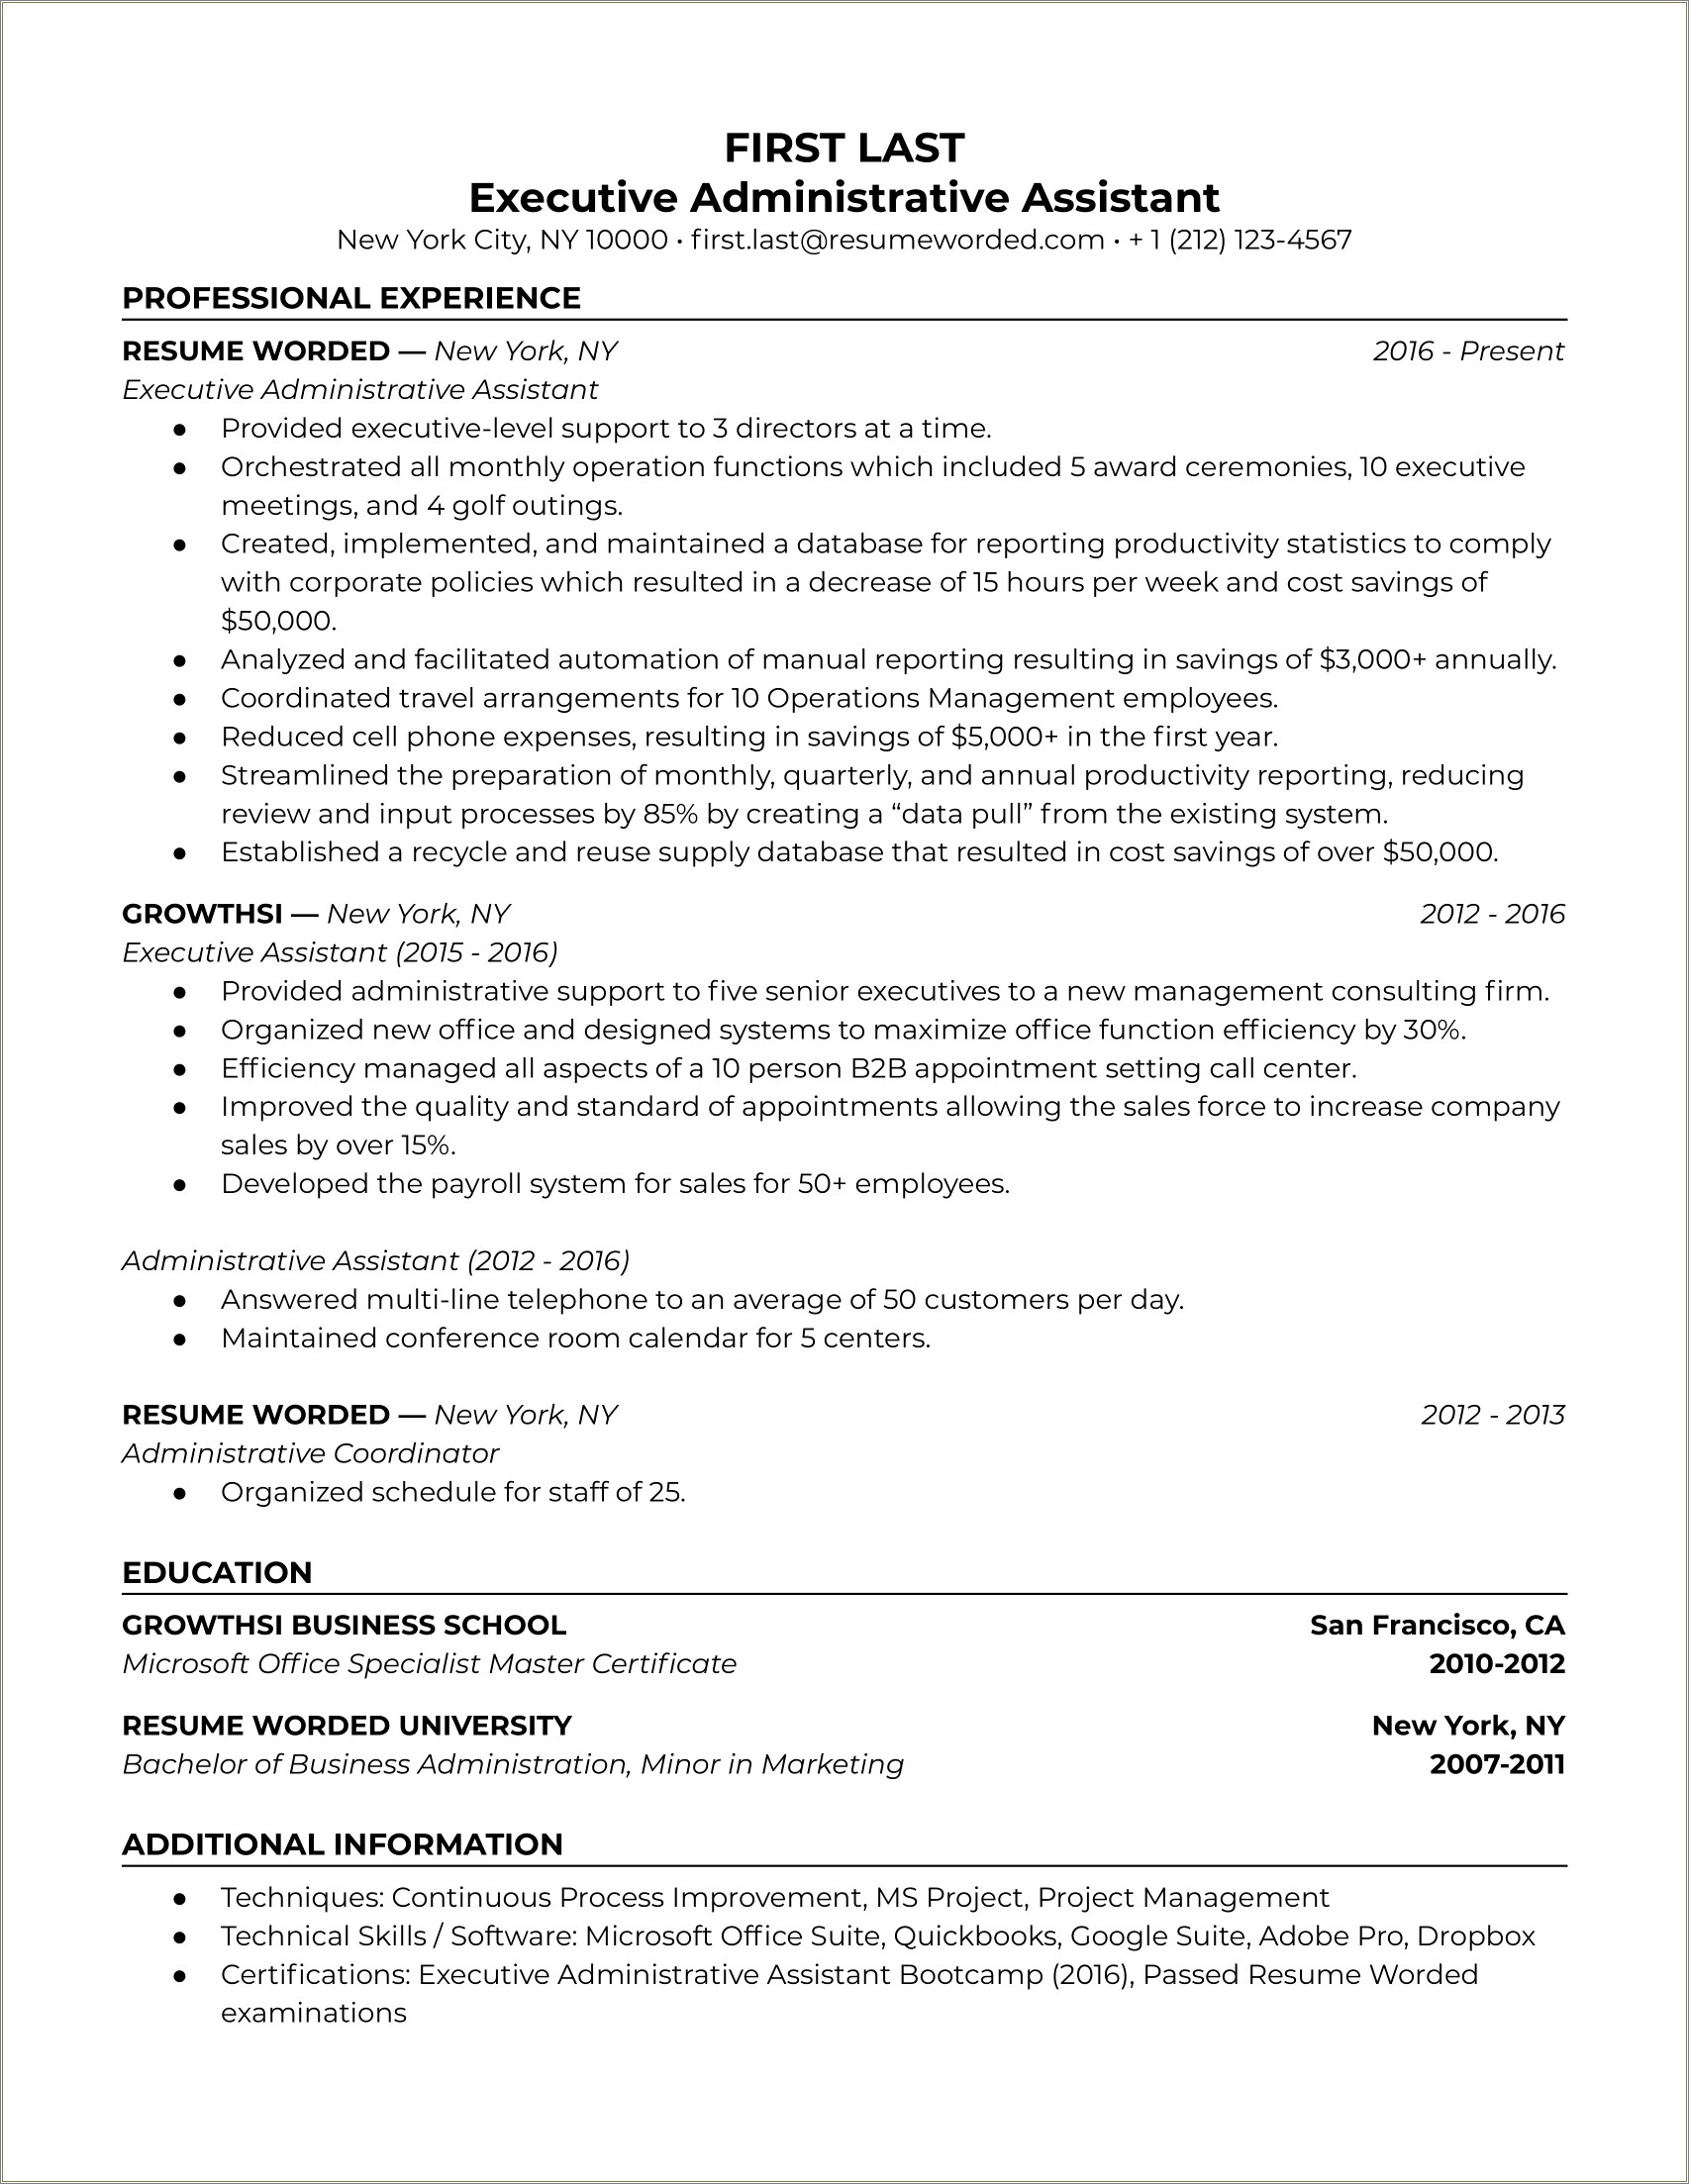 Resume Summary Of Qualifications Executive Assistant